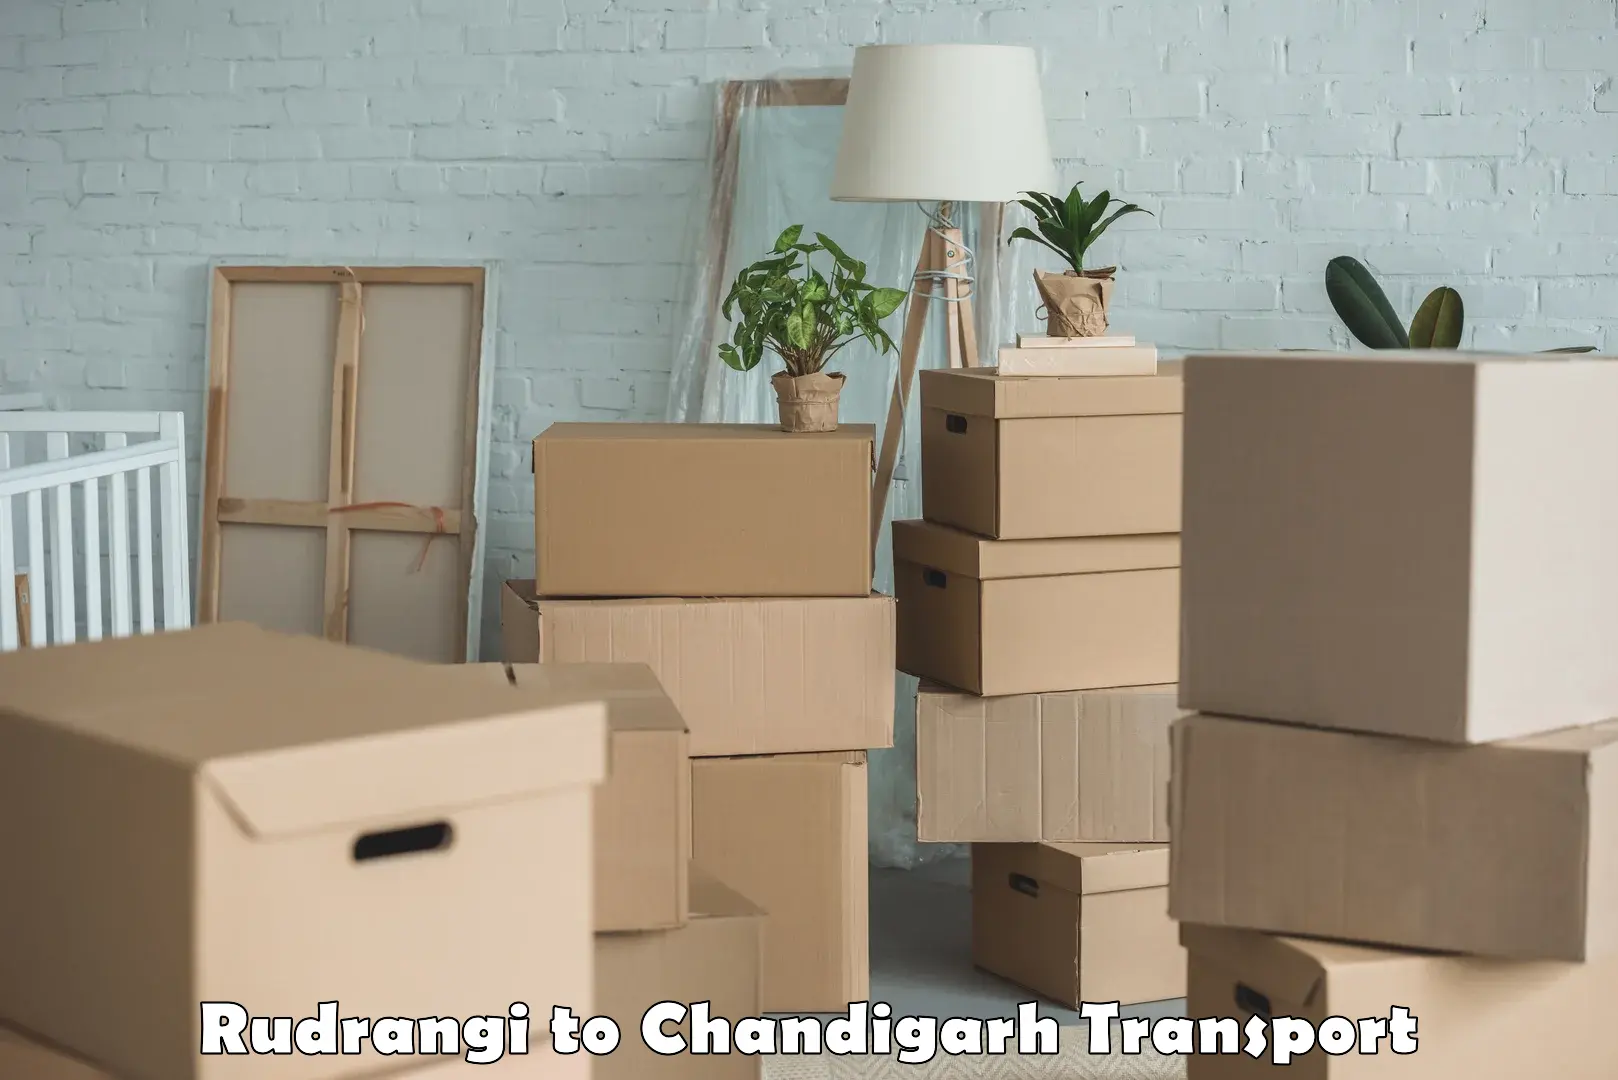 Delivery service Rudrangi to Chandigarh